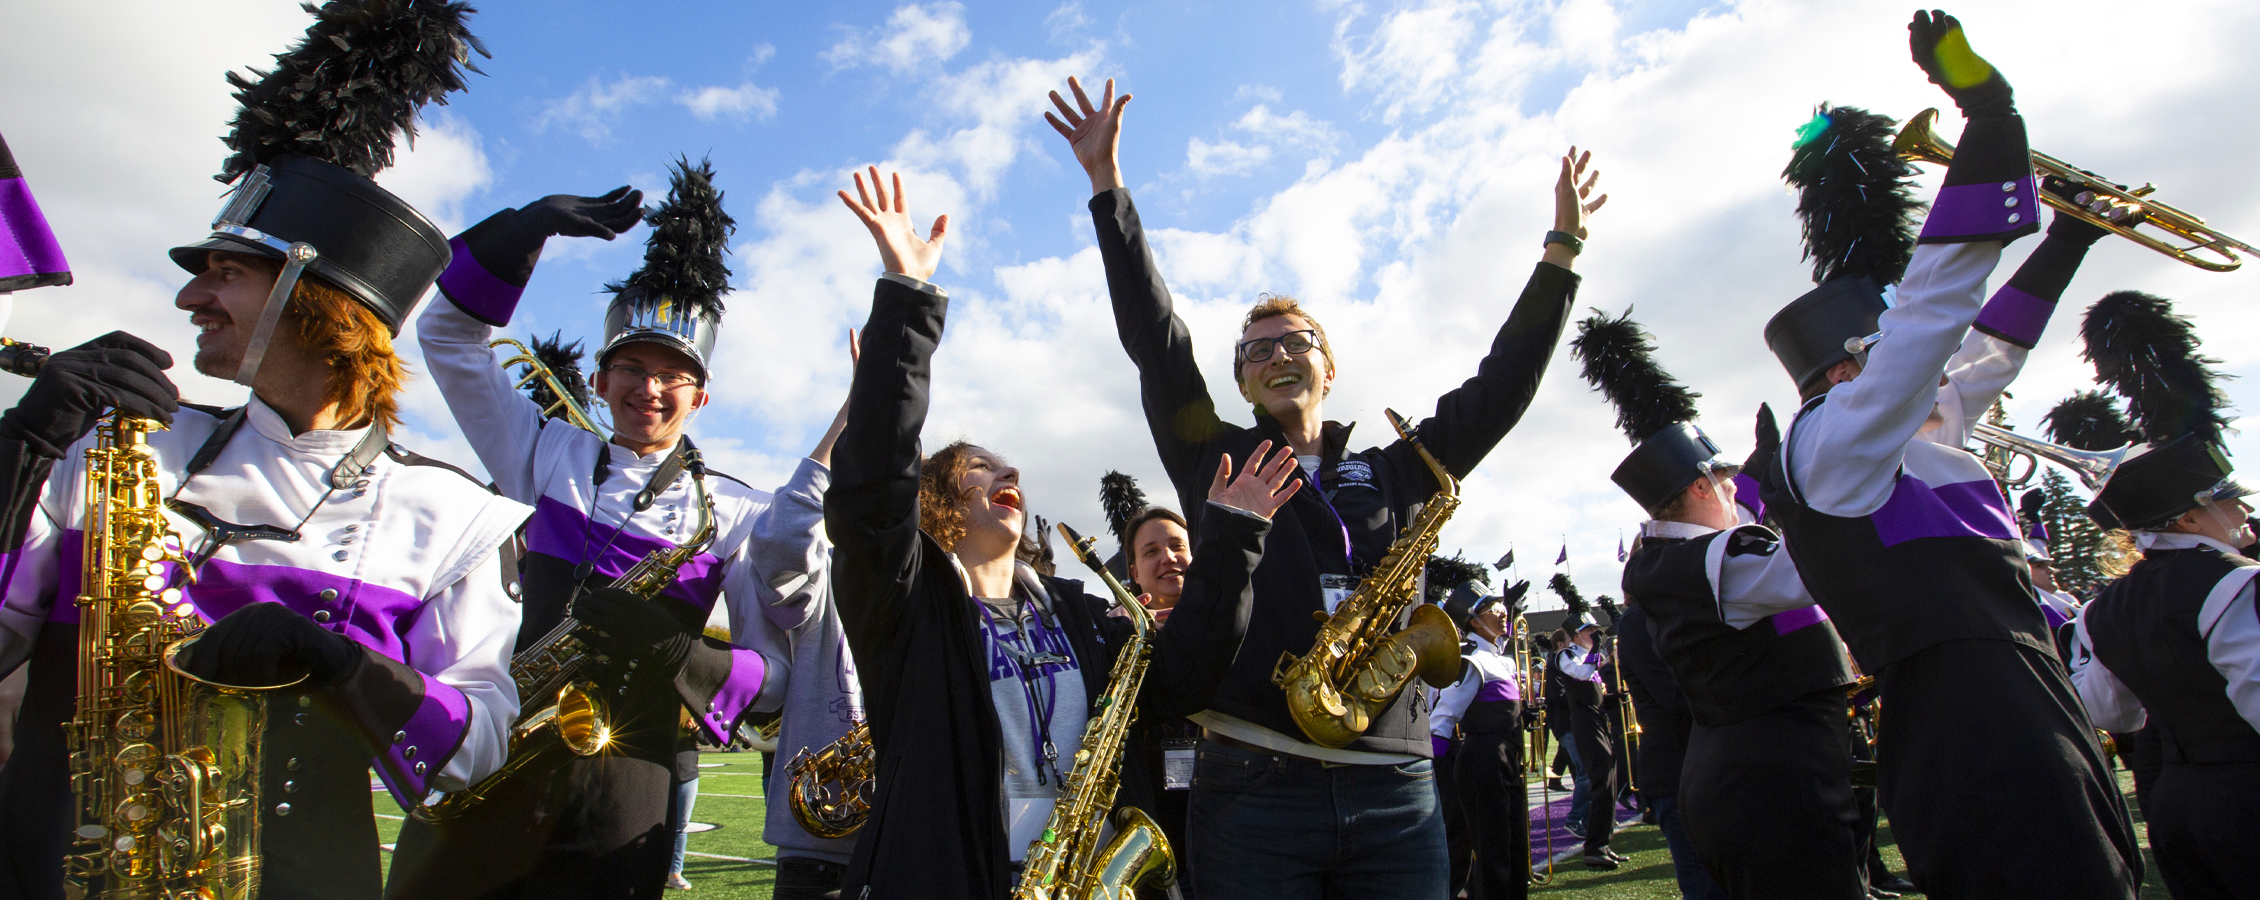 Marching Band members celebrate with their instruments and hands in the air.